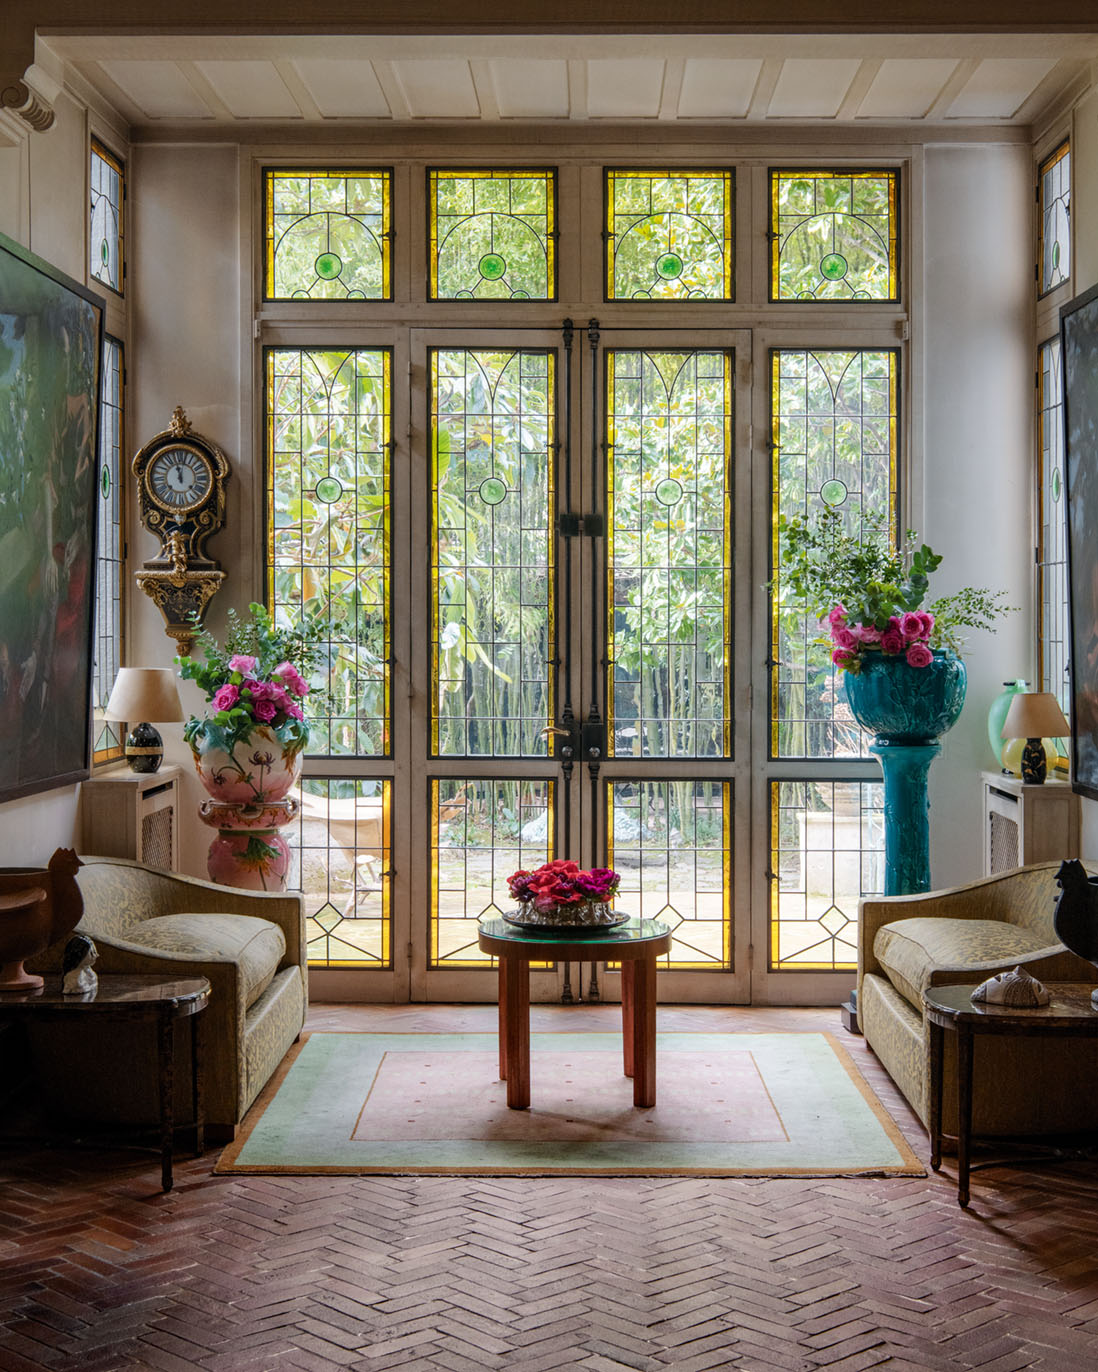 A scene from the Parisian home of Terry De Gunzburg featuring a floor to ceiling leaded glass window, a brick floor laid in a herring bone pattern, two cozy love seats facing each other, and bright pink flower arrangements placed on the coffee table, and on pedestals flanking the window.